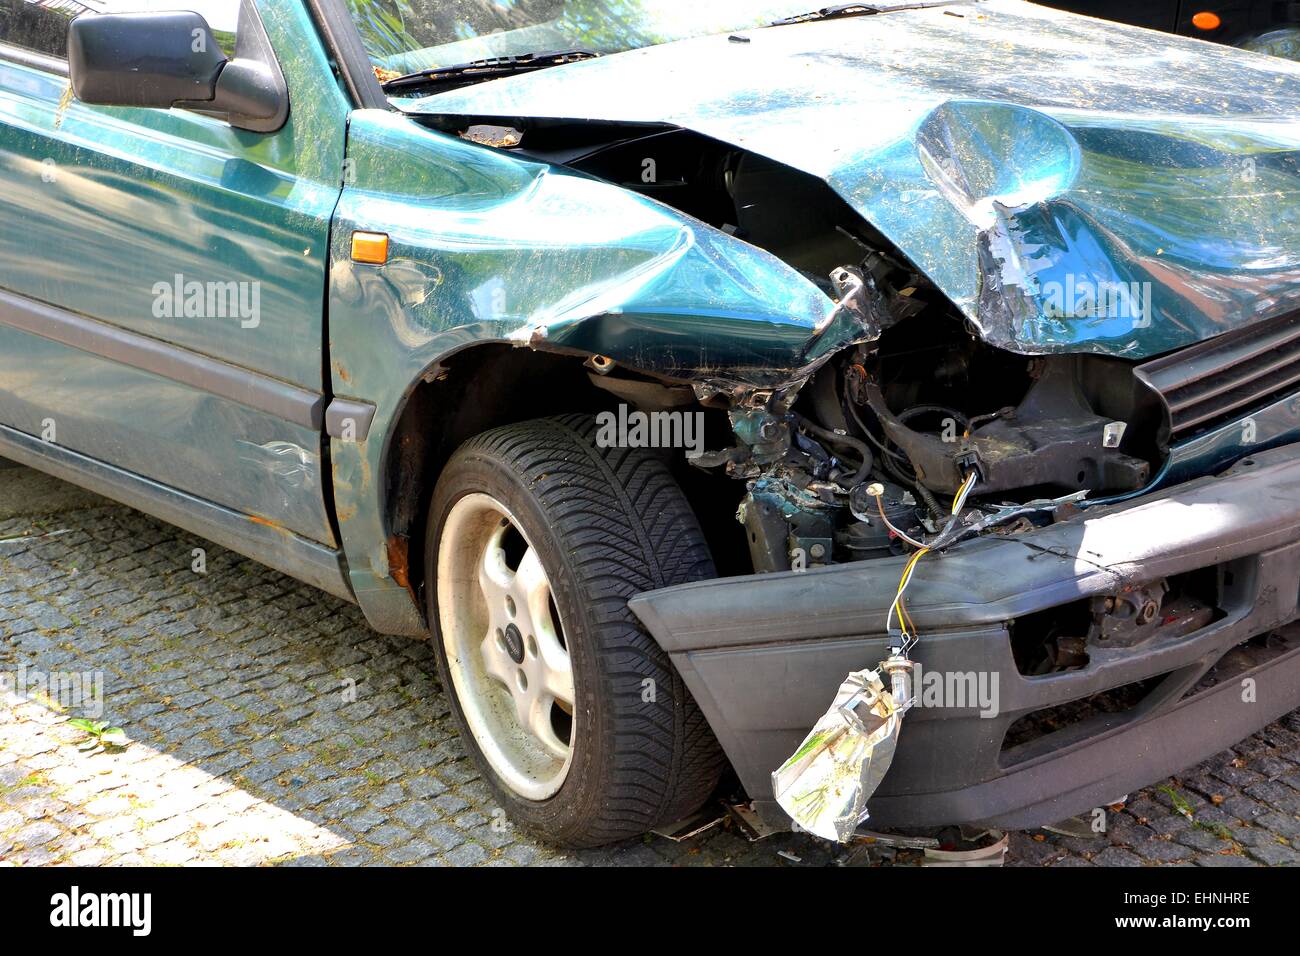 broken car after an accident Stock Photo